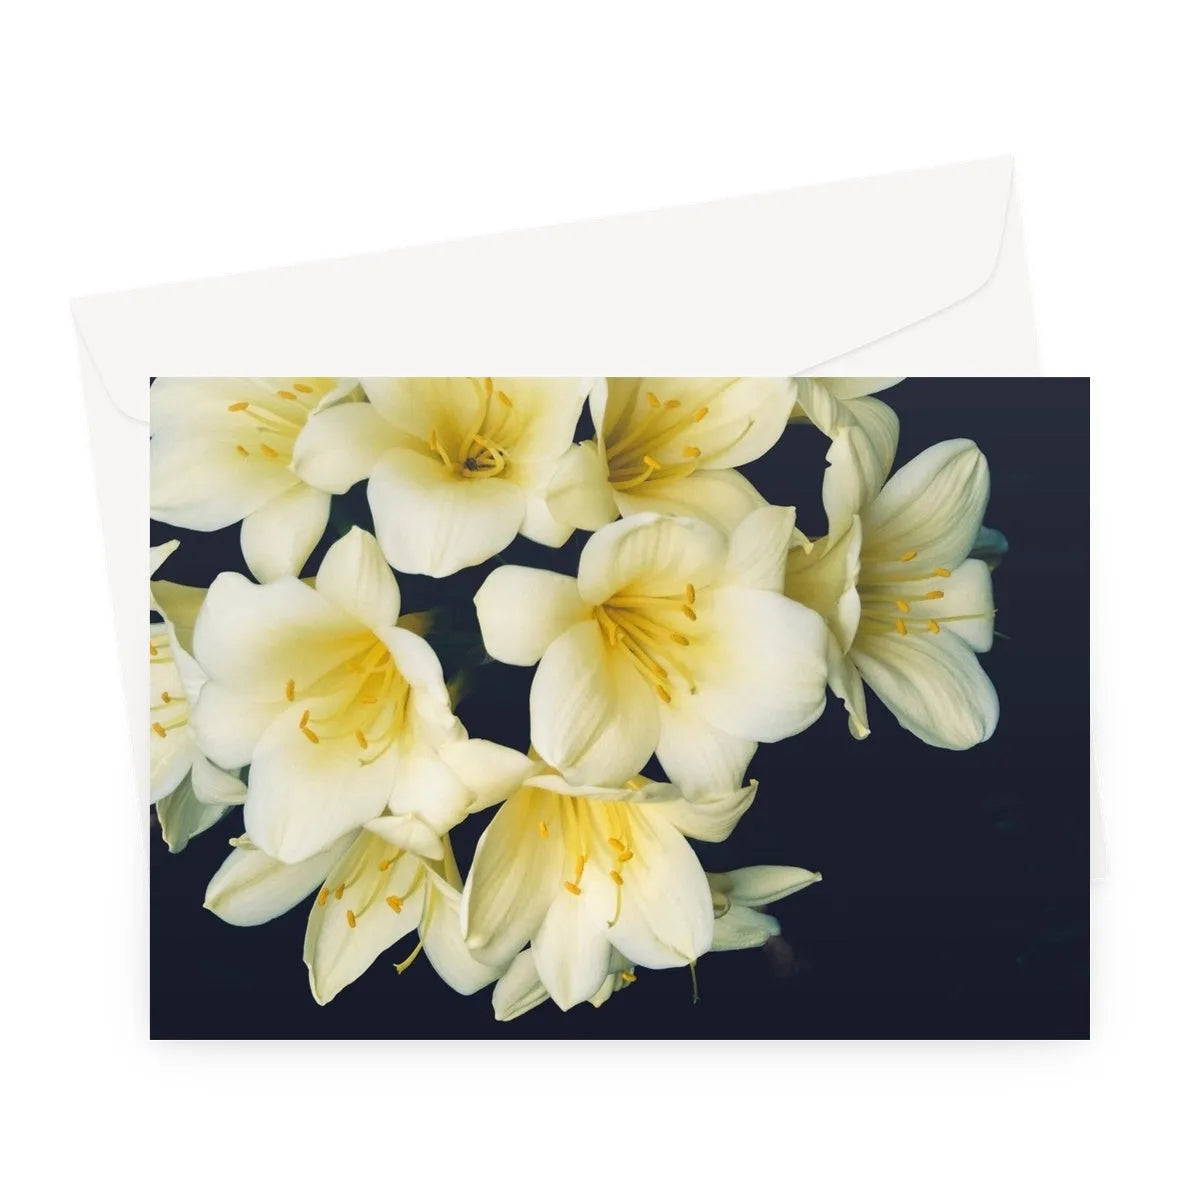 Flower Power Too Greeting Card - Greeting & Note Cards - Aesthetic Art